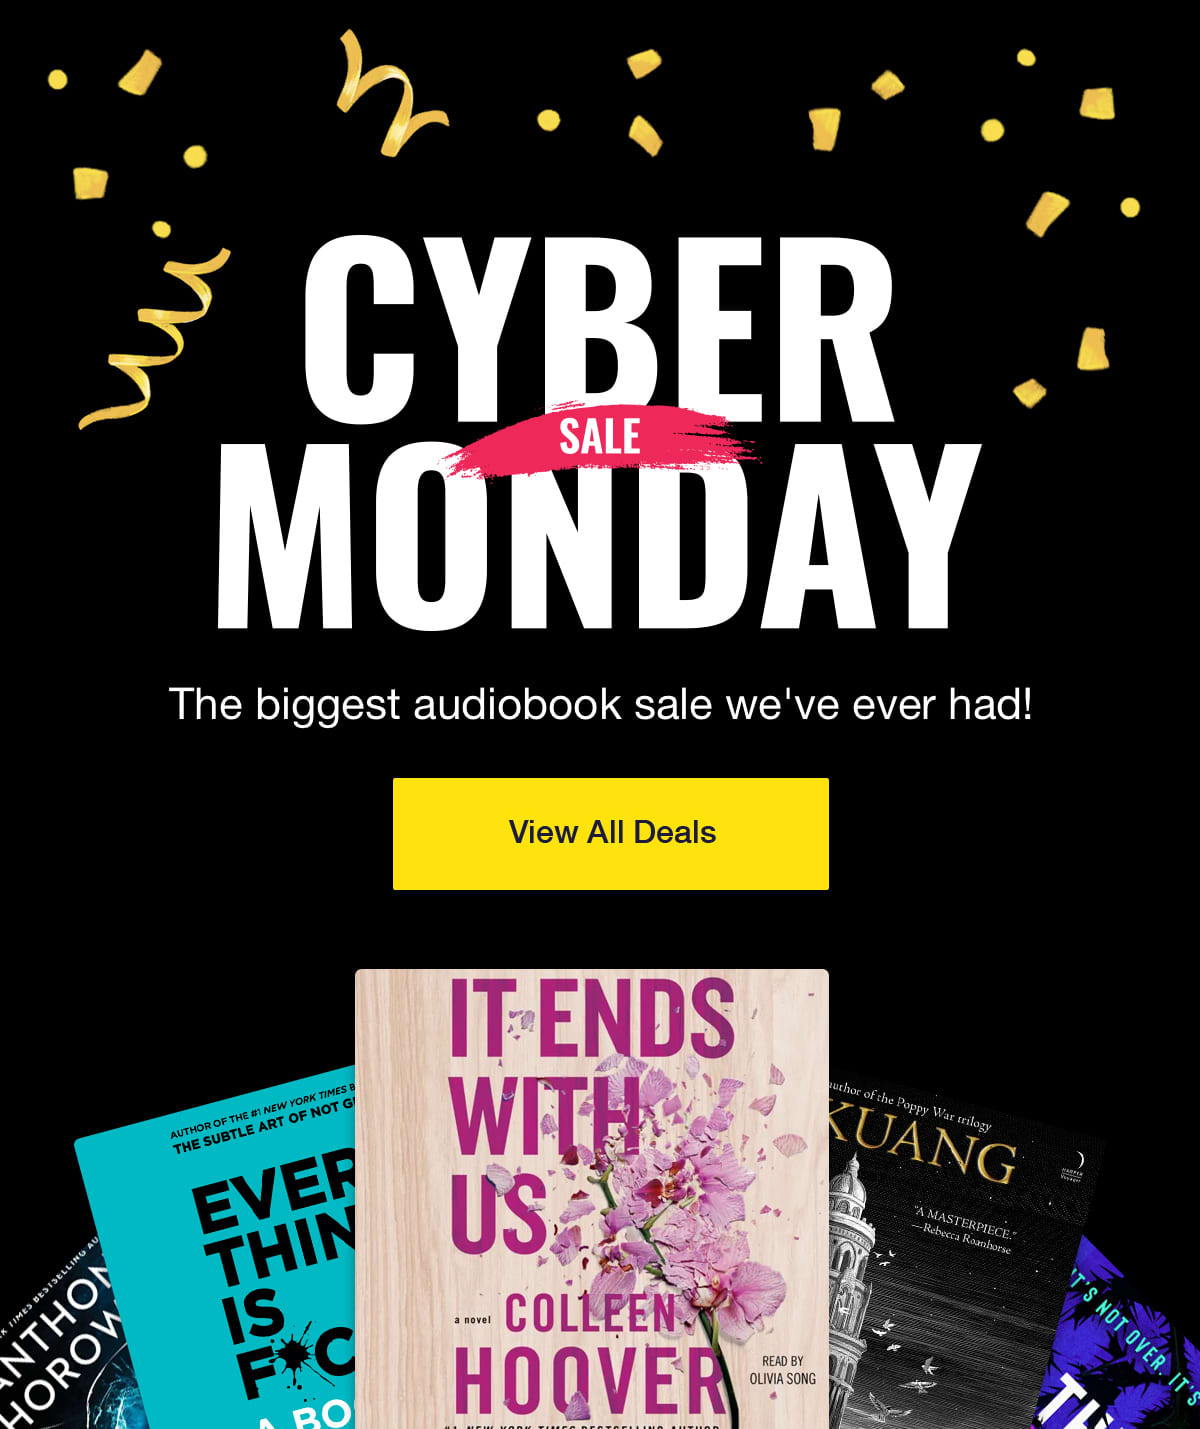 Cyber Monday sale: The biggest audiobook sale we've ever had! Click to view all deals